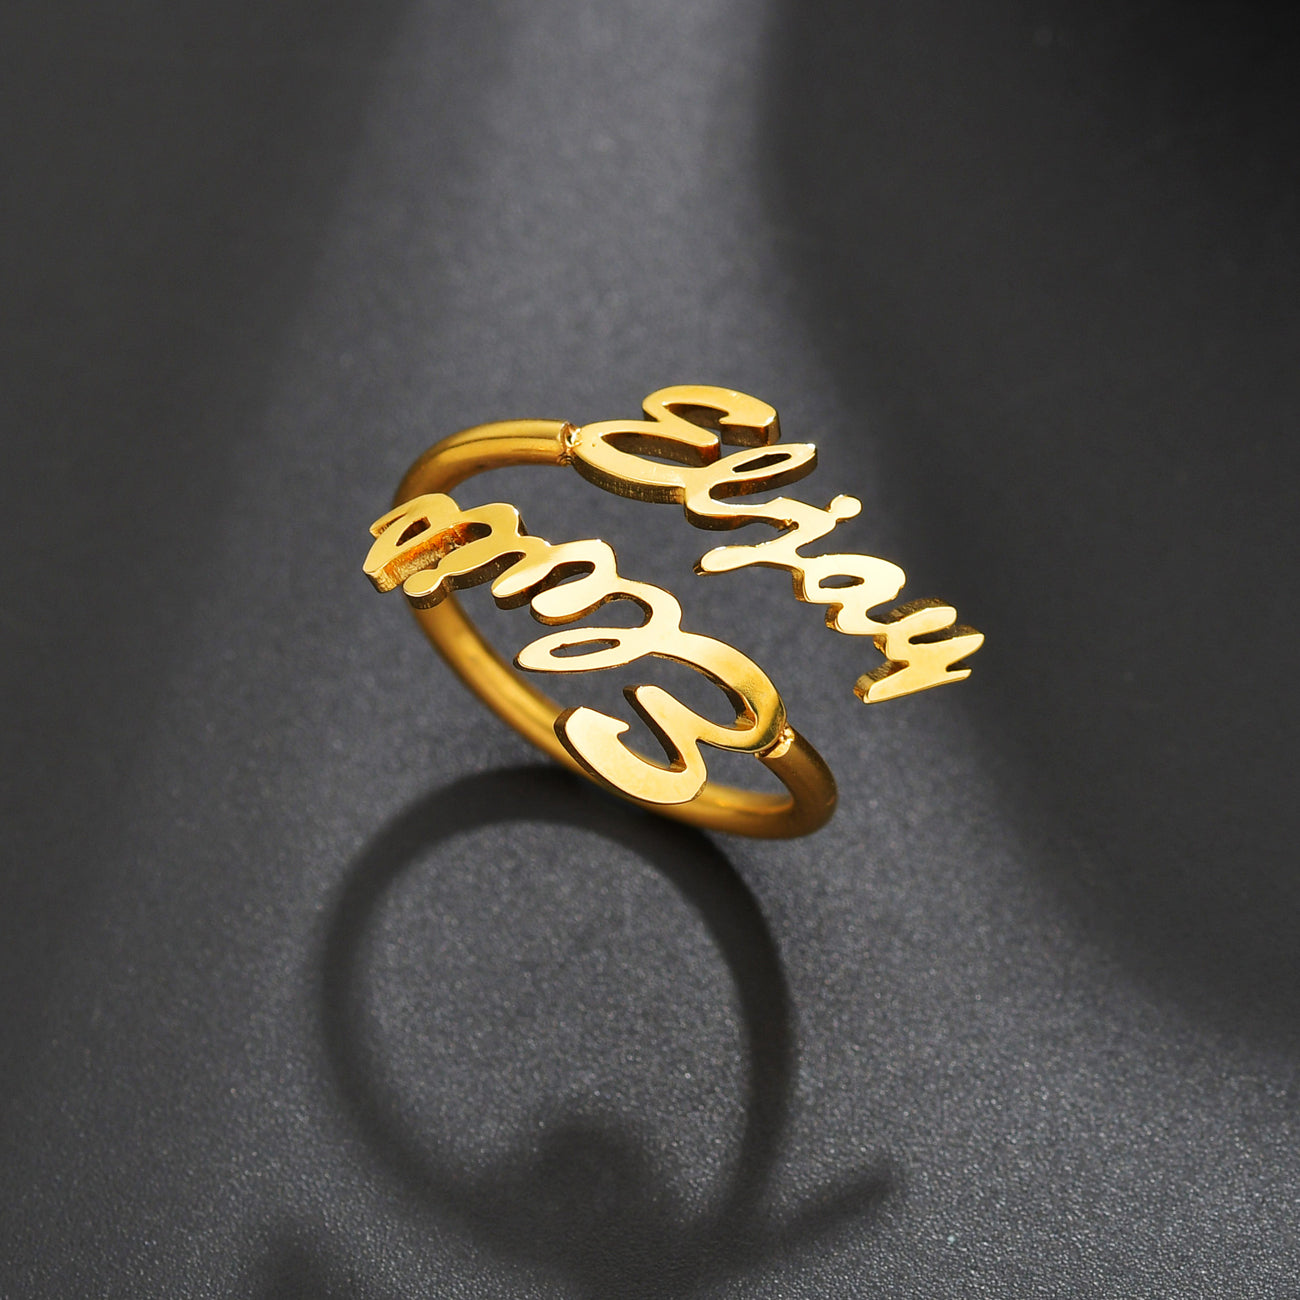 Personalized Rings for Women, 18k Gold Name Rings Personalized with Name/Initial Letter/Birth Year Lucky Number Custom Thumb Rings for Engagement/Wedding/Christmas Gift